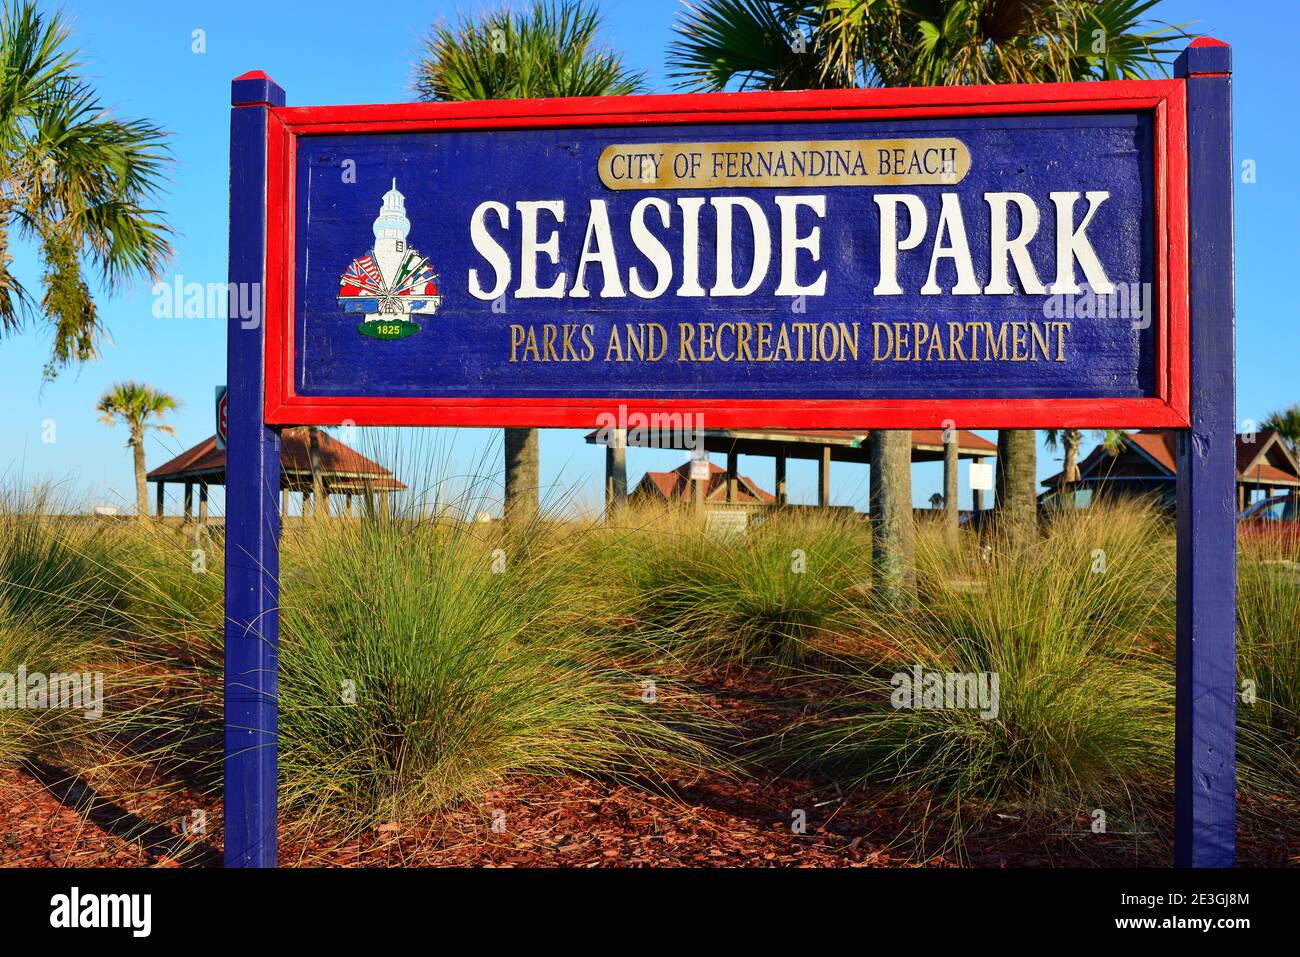 A blue and red wooden sign posted by the Park and Rec Department of City of Fernandina Beach Seaside Park, on Ameila Island, FL Stock Photo